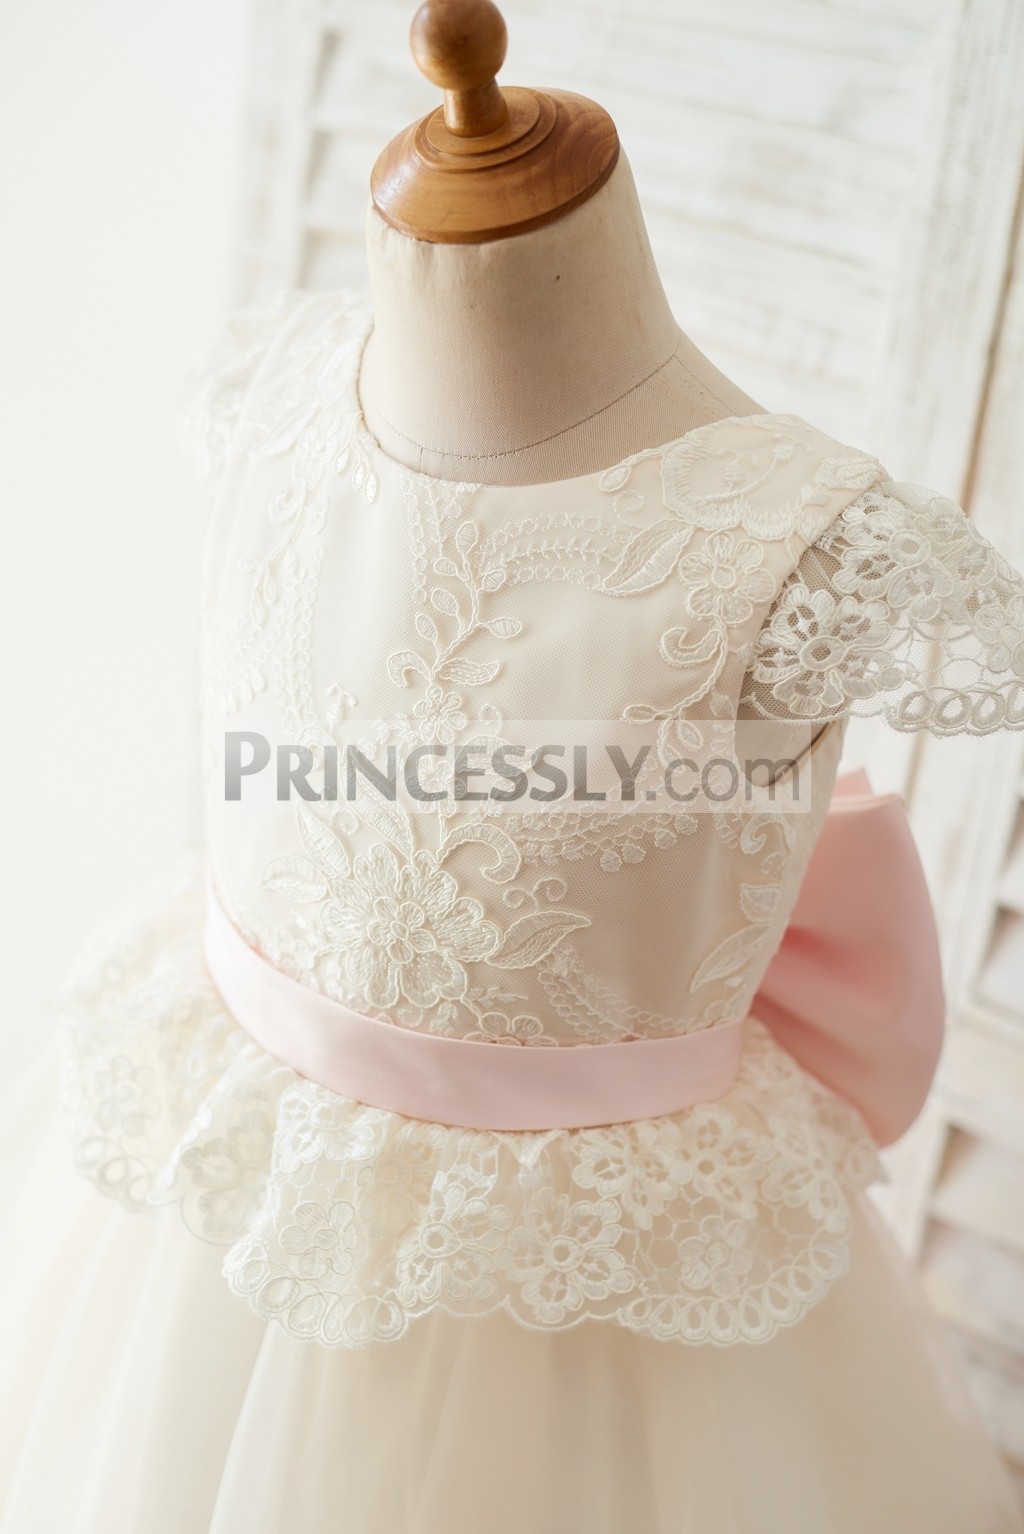 Lace bodice with pink belt